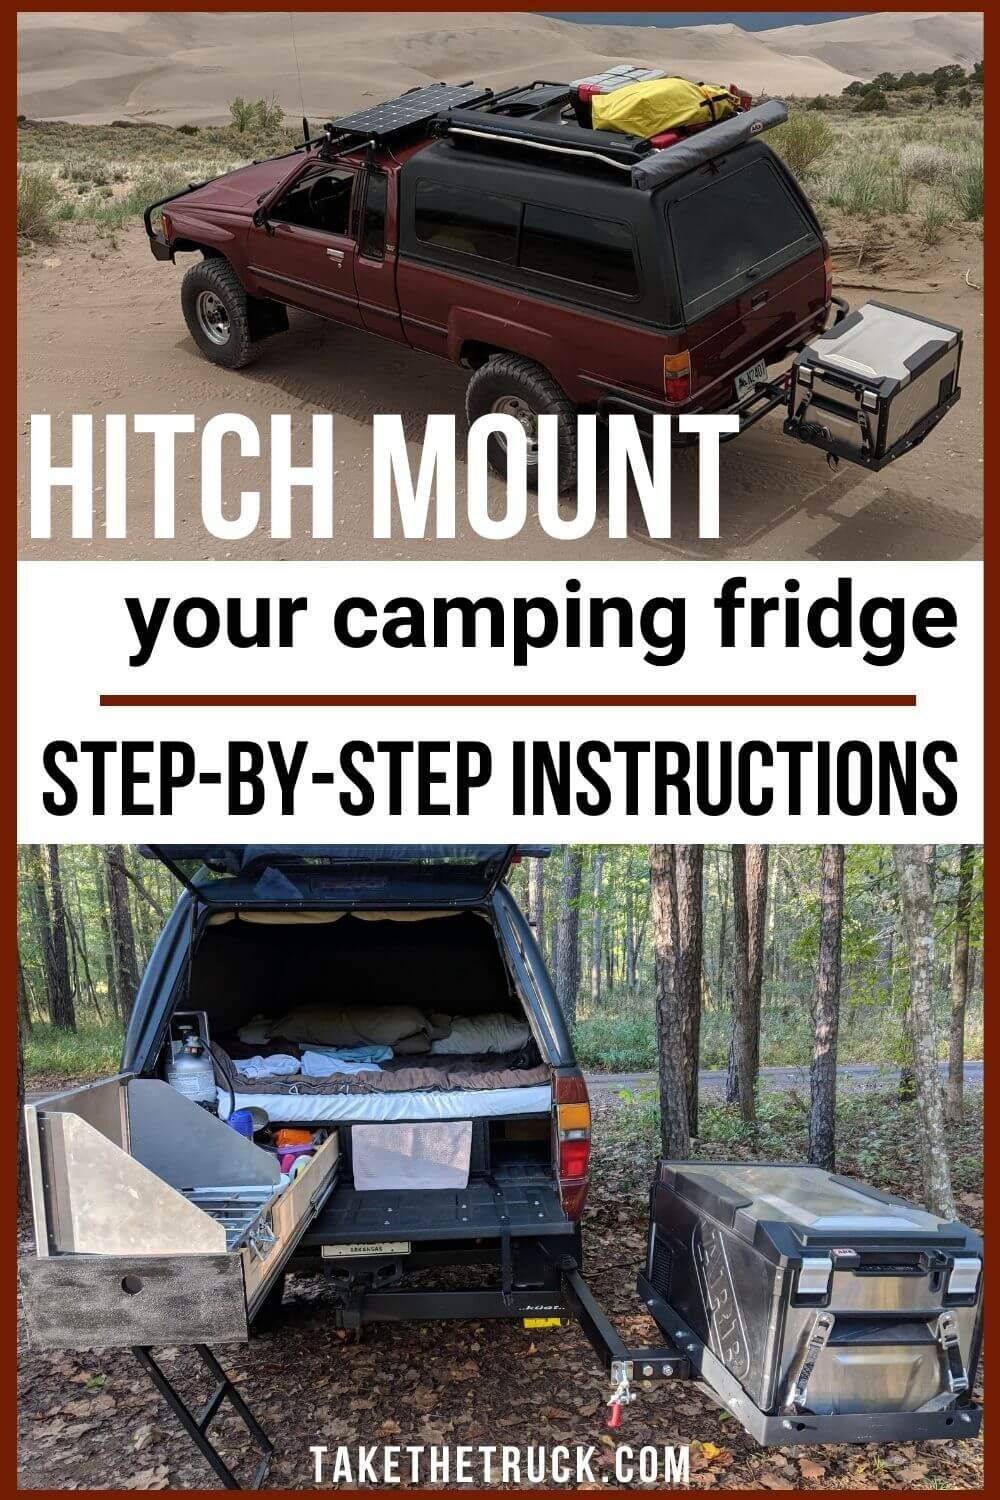 Rather than using a camping fridge slide, check out this DIY camping fridge hack for mounting off your hitch! This works especially well when truck shell camping with an ARB Elements Fridge.